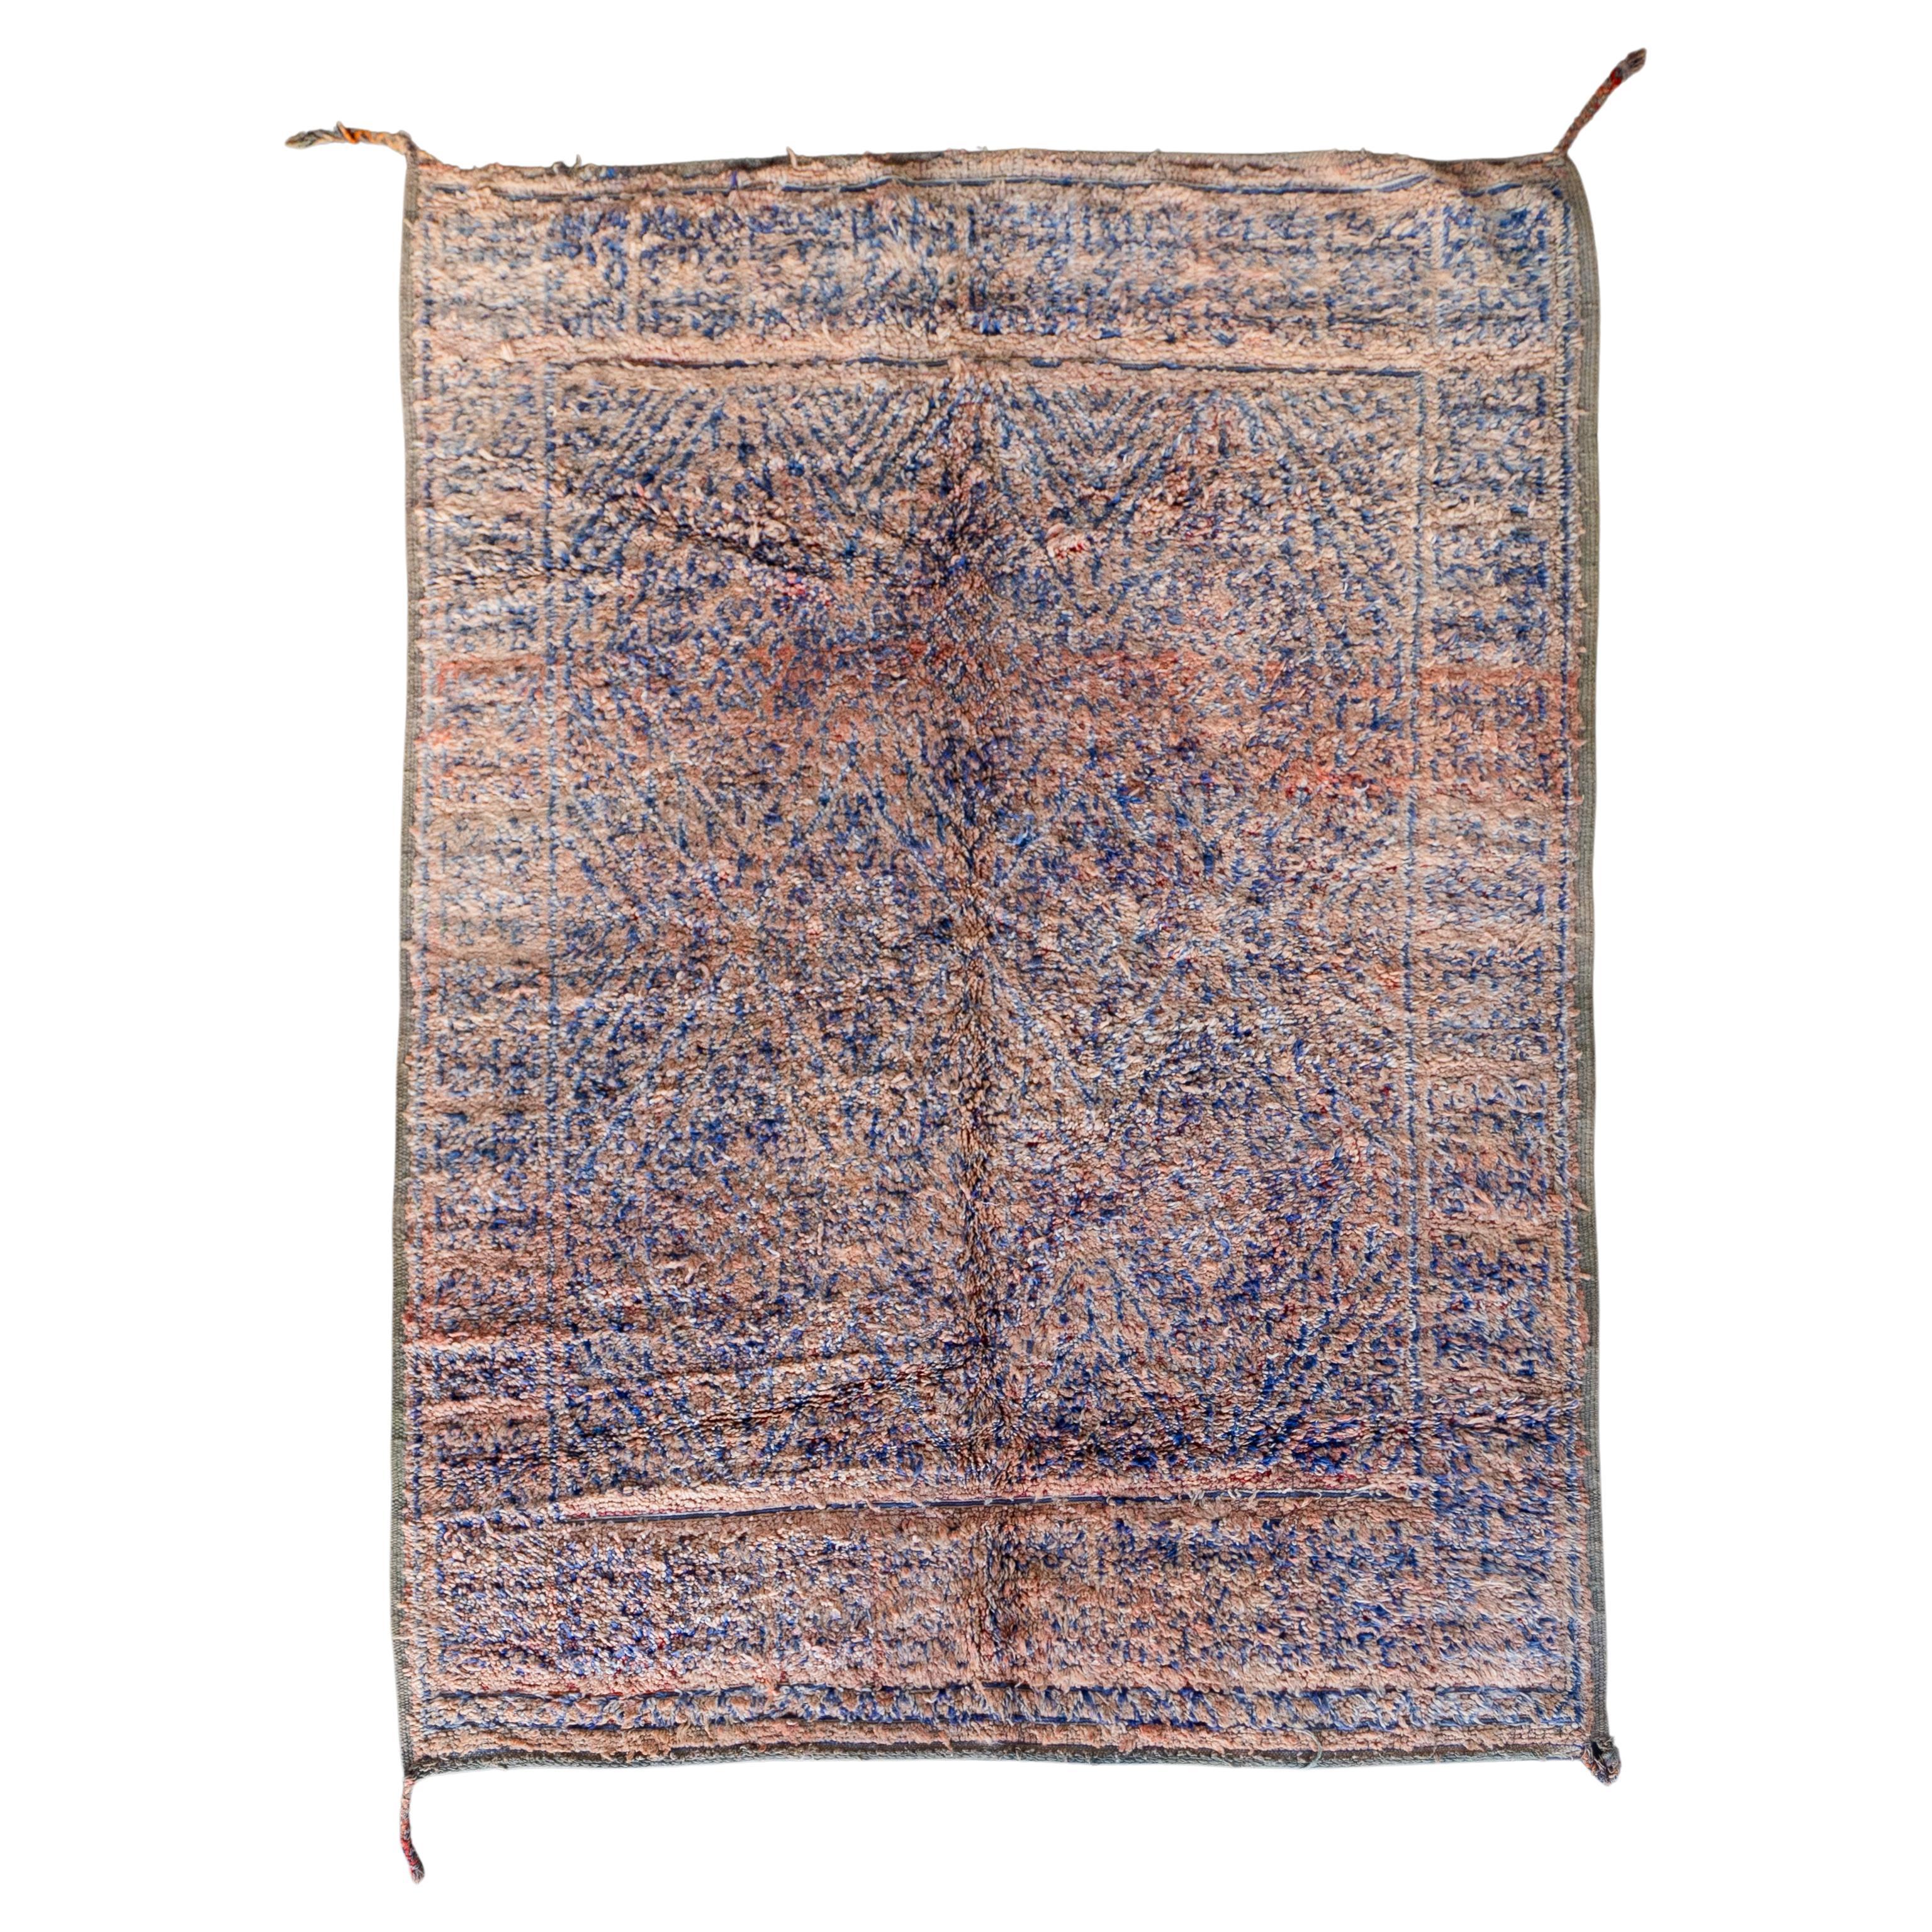 Blue & Beige Vintage Moroccan Wool Rug from 70s I 6.3x8.9 Ft 190x270 Cm For Sale